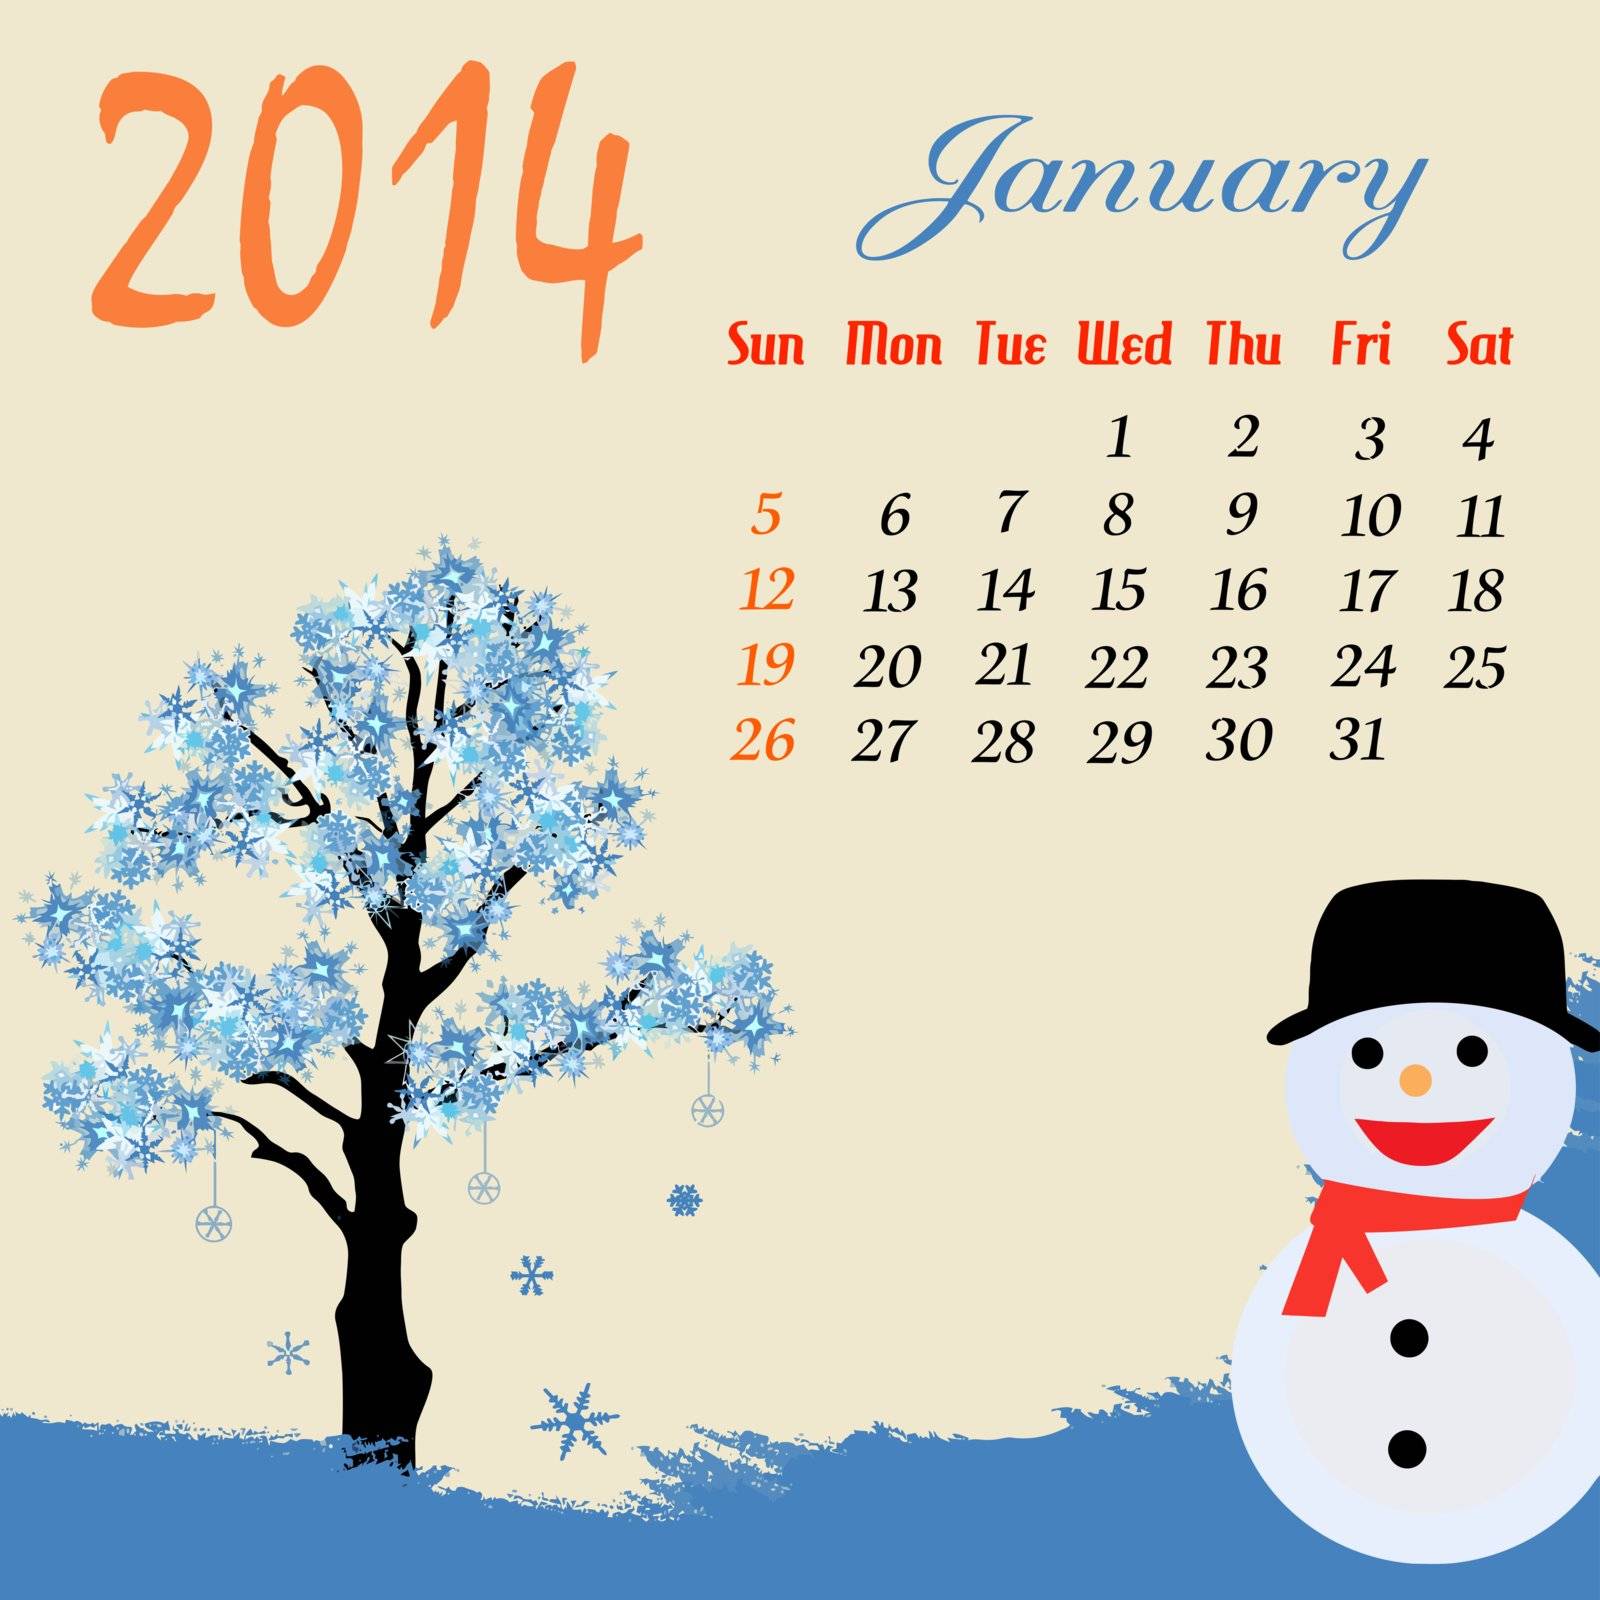 Calendar for 2014 January with winter tree and snowman, vector illustration